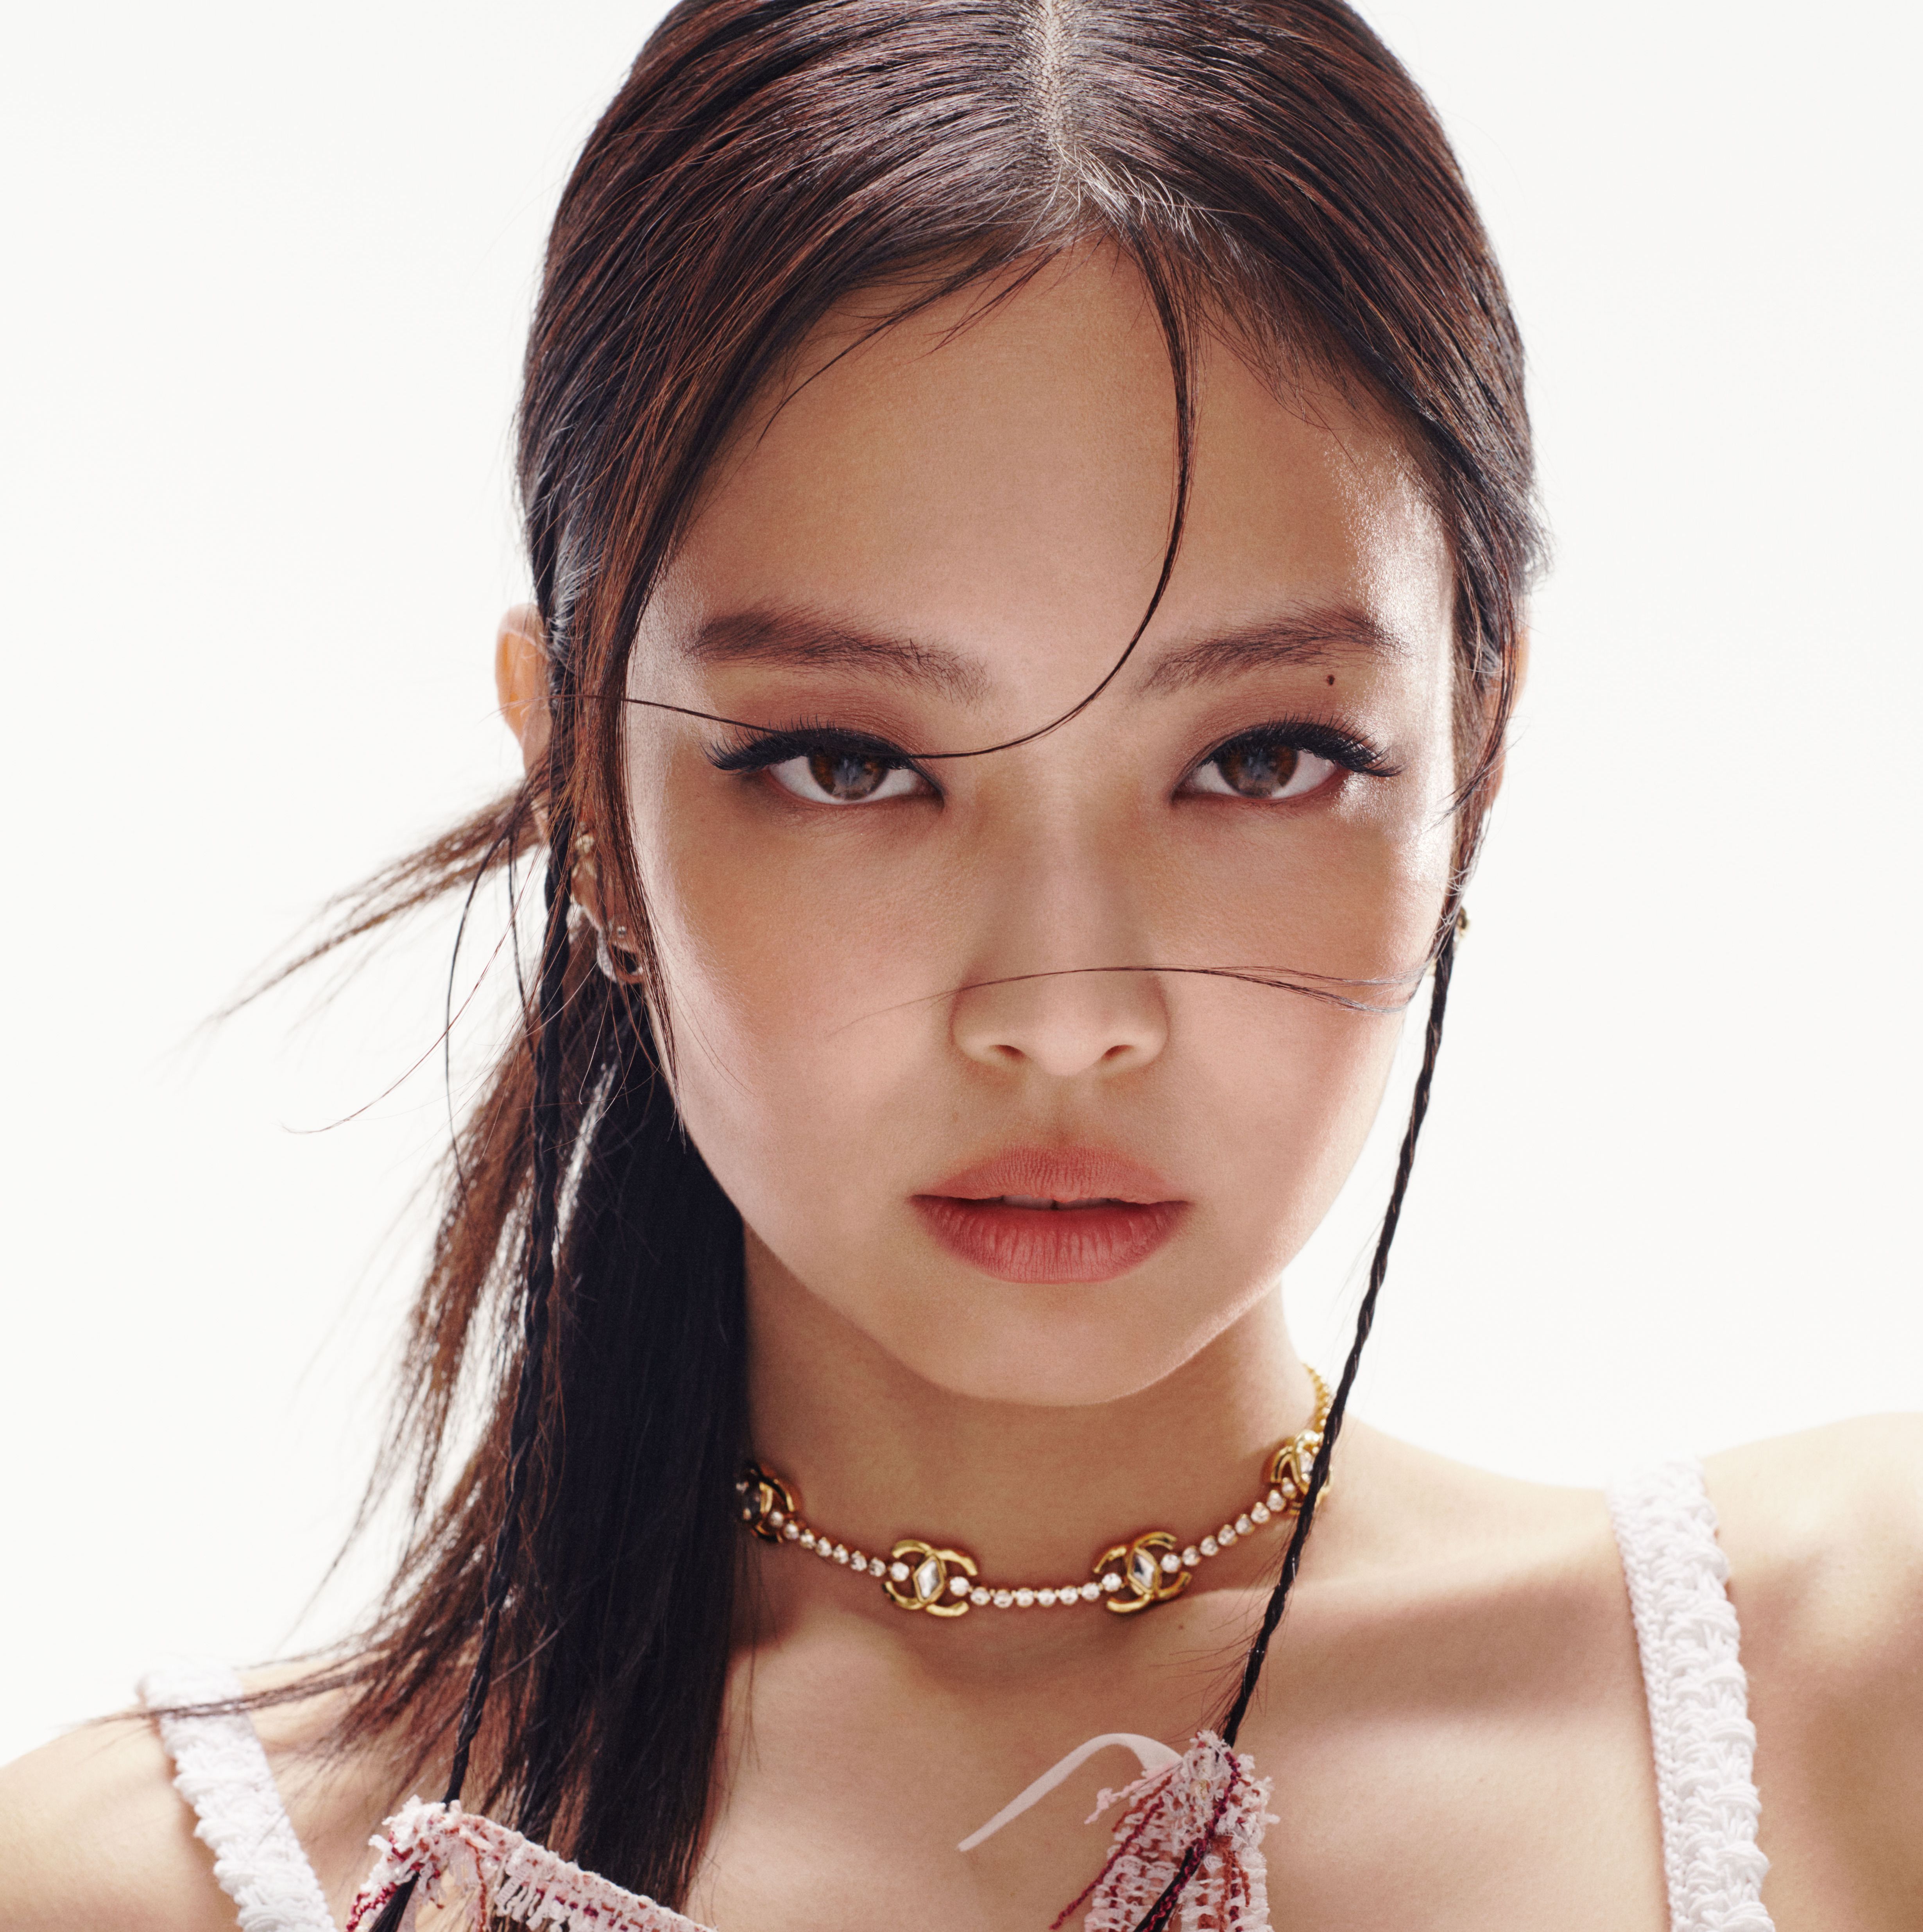 The superstar, actress, and fashion idol answers burning questions straight from her fans, the Blinks